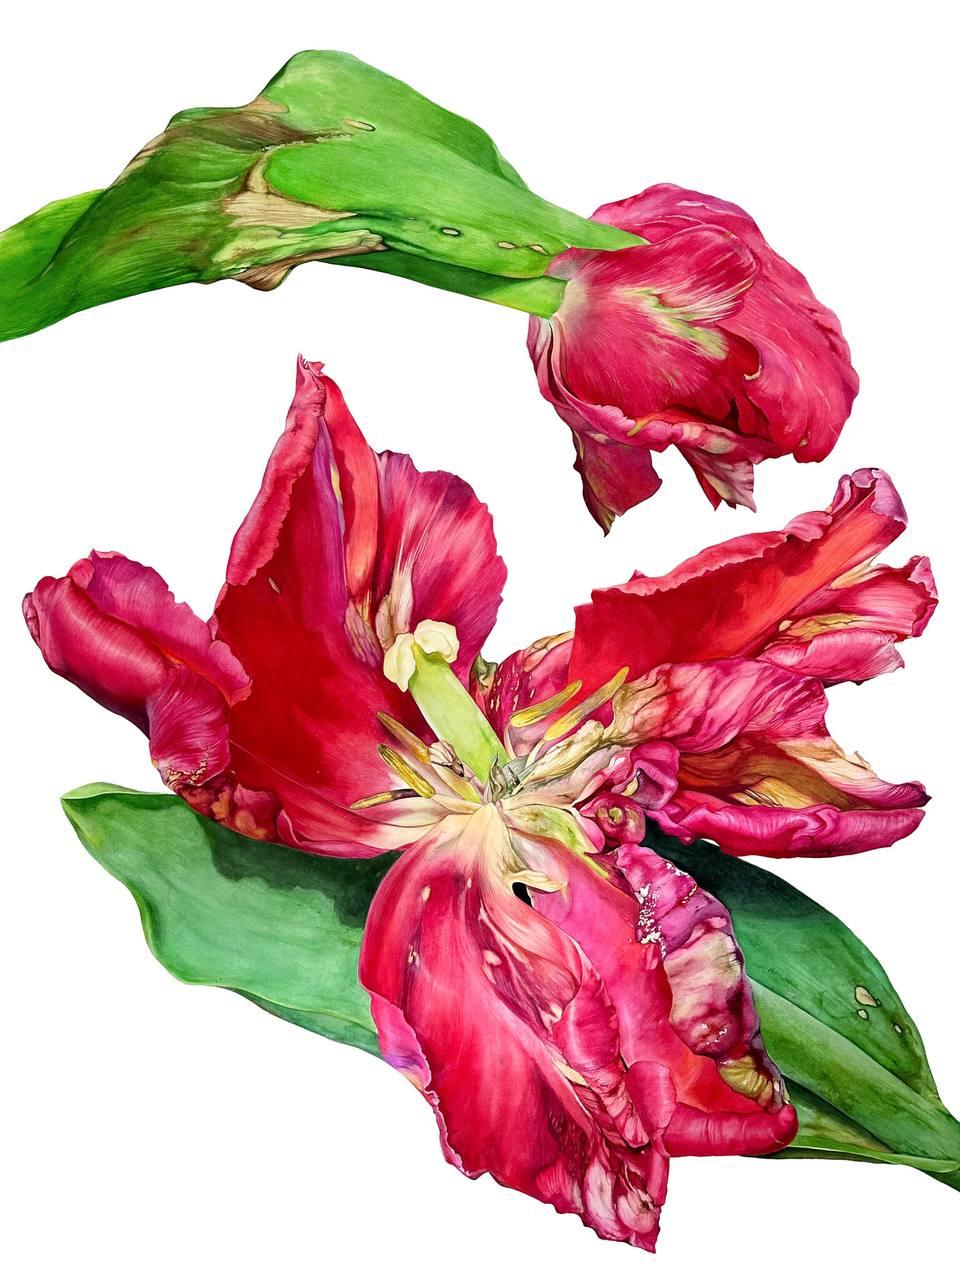 Flower, pencil, watercolor, paper, 140x100cm - Painting by Elena Brauschenberg